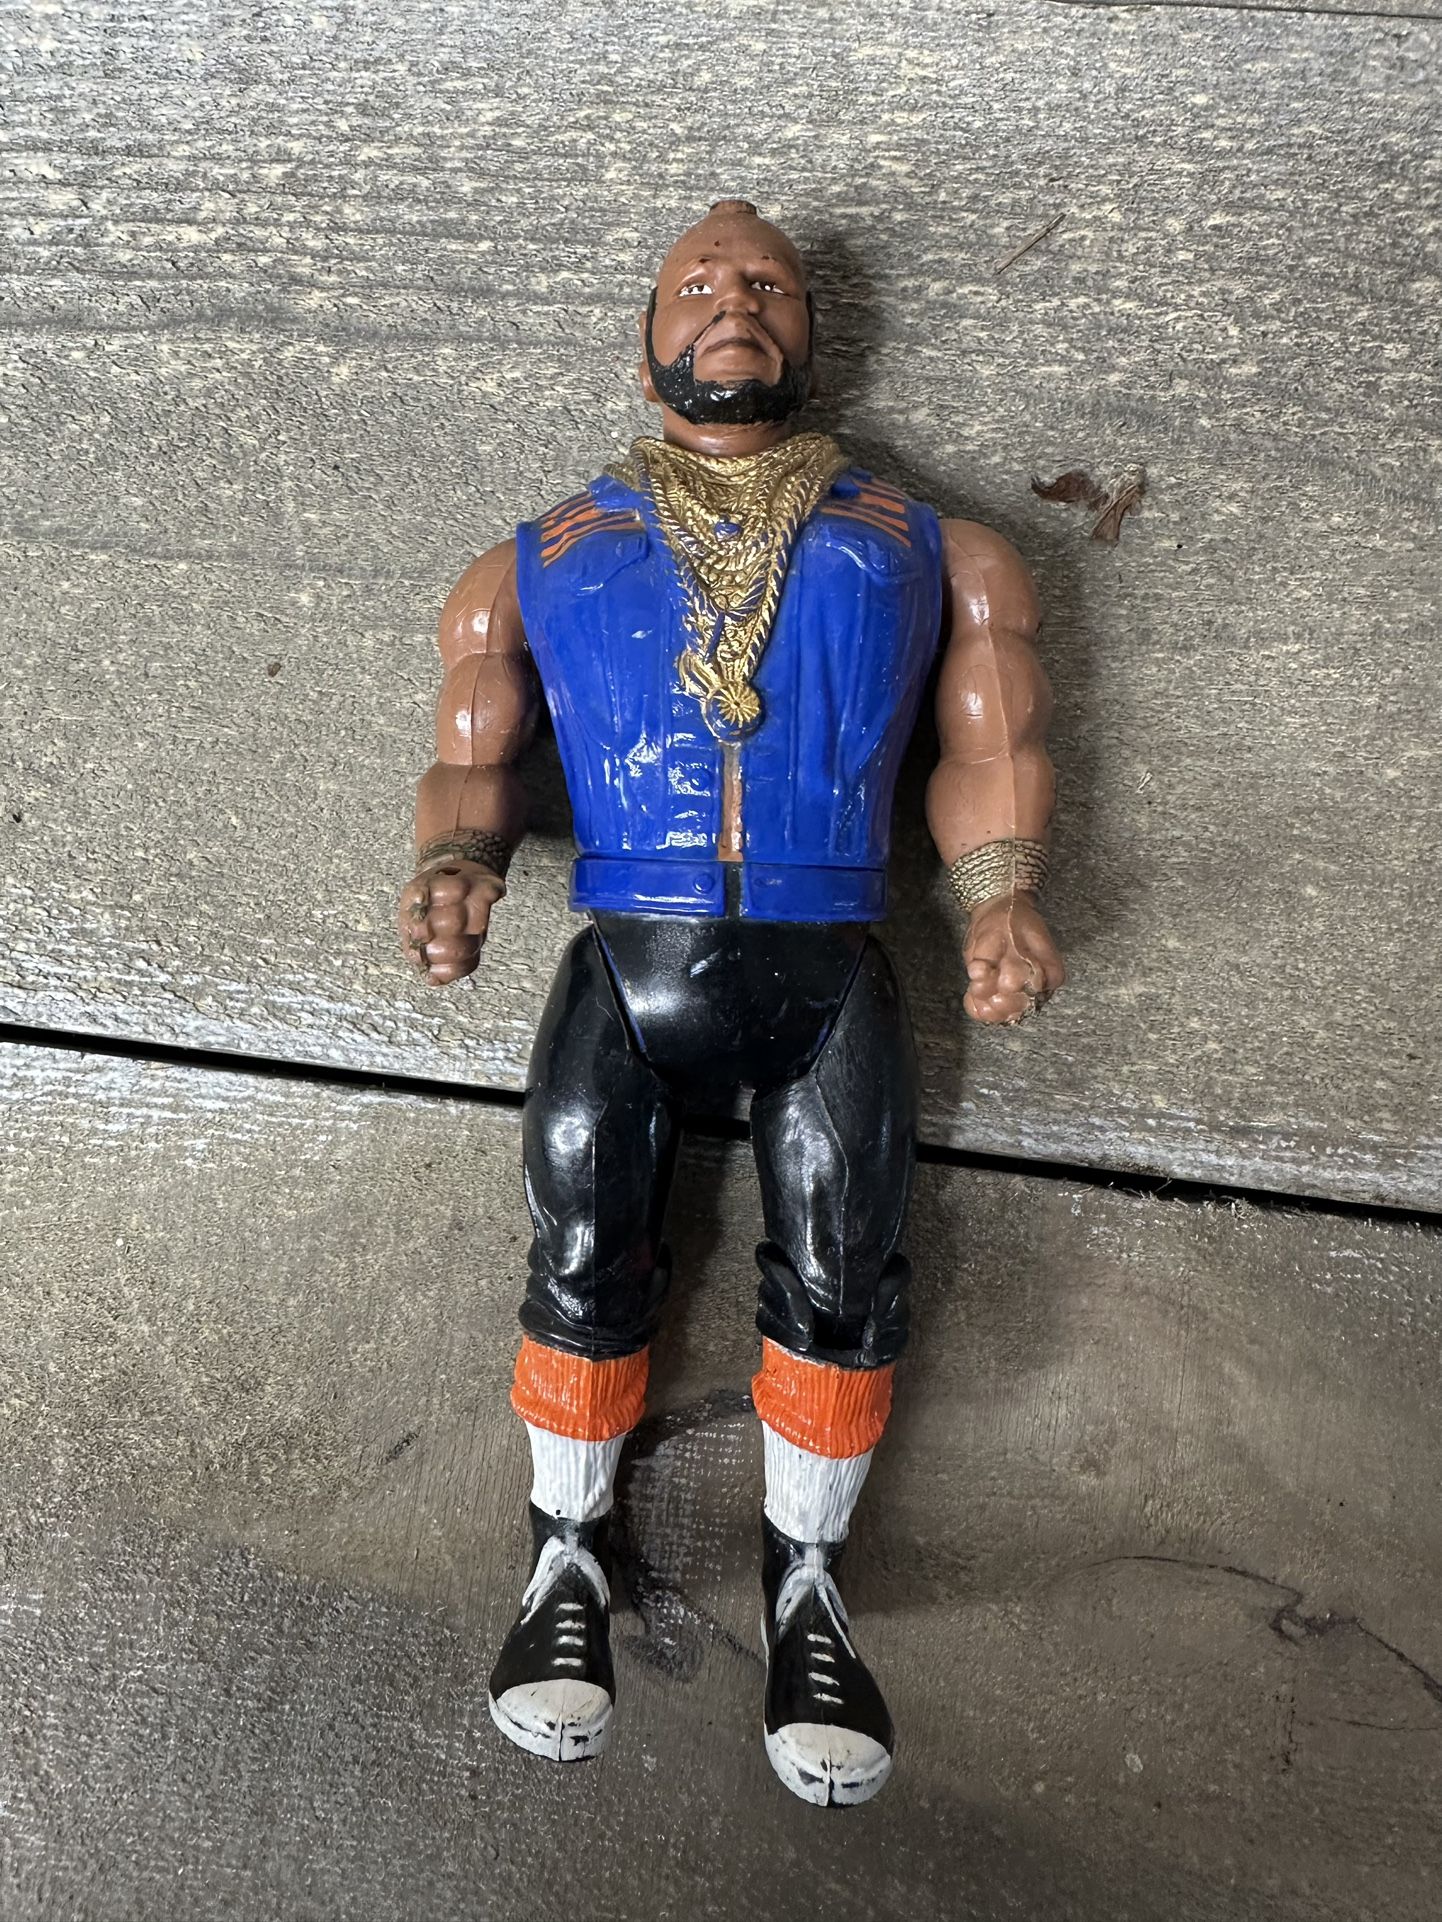 Vintage 1983 A-Team B.A. Baracus Mr. T Action 6 Inch Figure Cannell Galoob